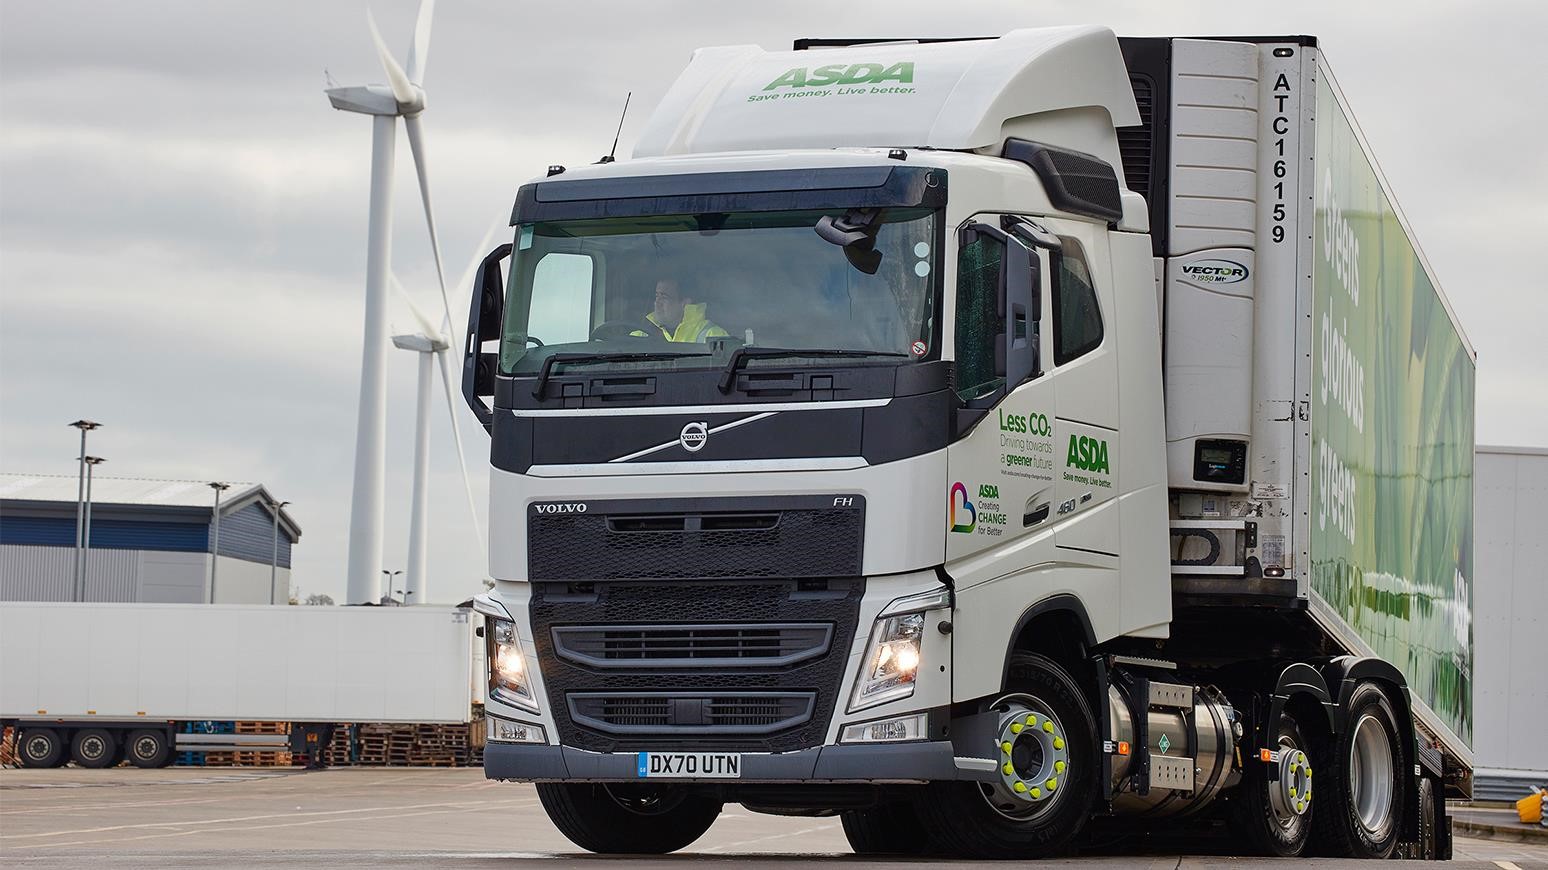 Supermarket Giant Asda Takes Delivery Of 202 Volvo FH LNG Tractor Units